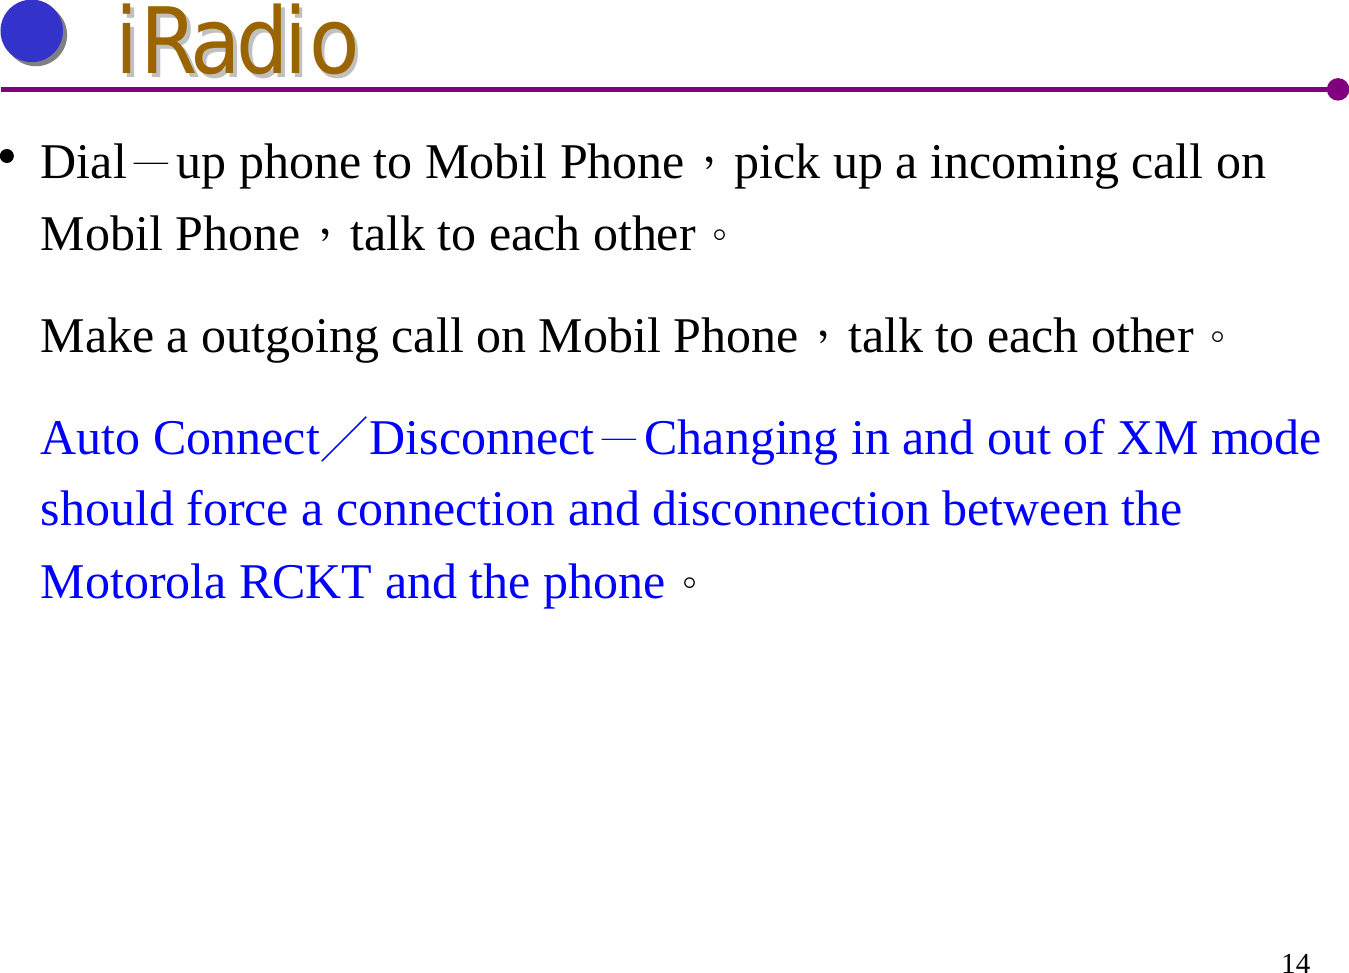 14Dial－up phone to Mobil Phone，pick up a incoming call on Mobil Phone，talk to each other。Make a outgoing call on Mobil Phone，talk to each other。Auto Connect／Disconnect－Changing in and out of XM mode should force a connection and disconnection between the Motorola RCKT and the phone。iRadioiRadio